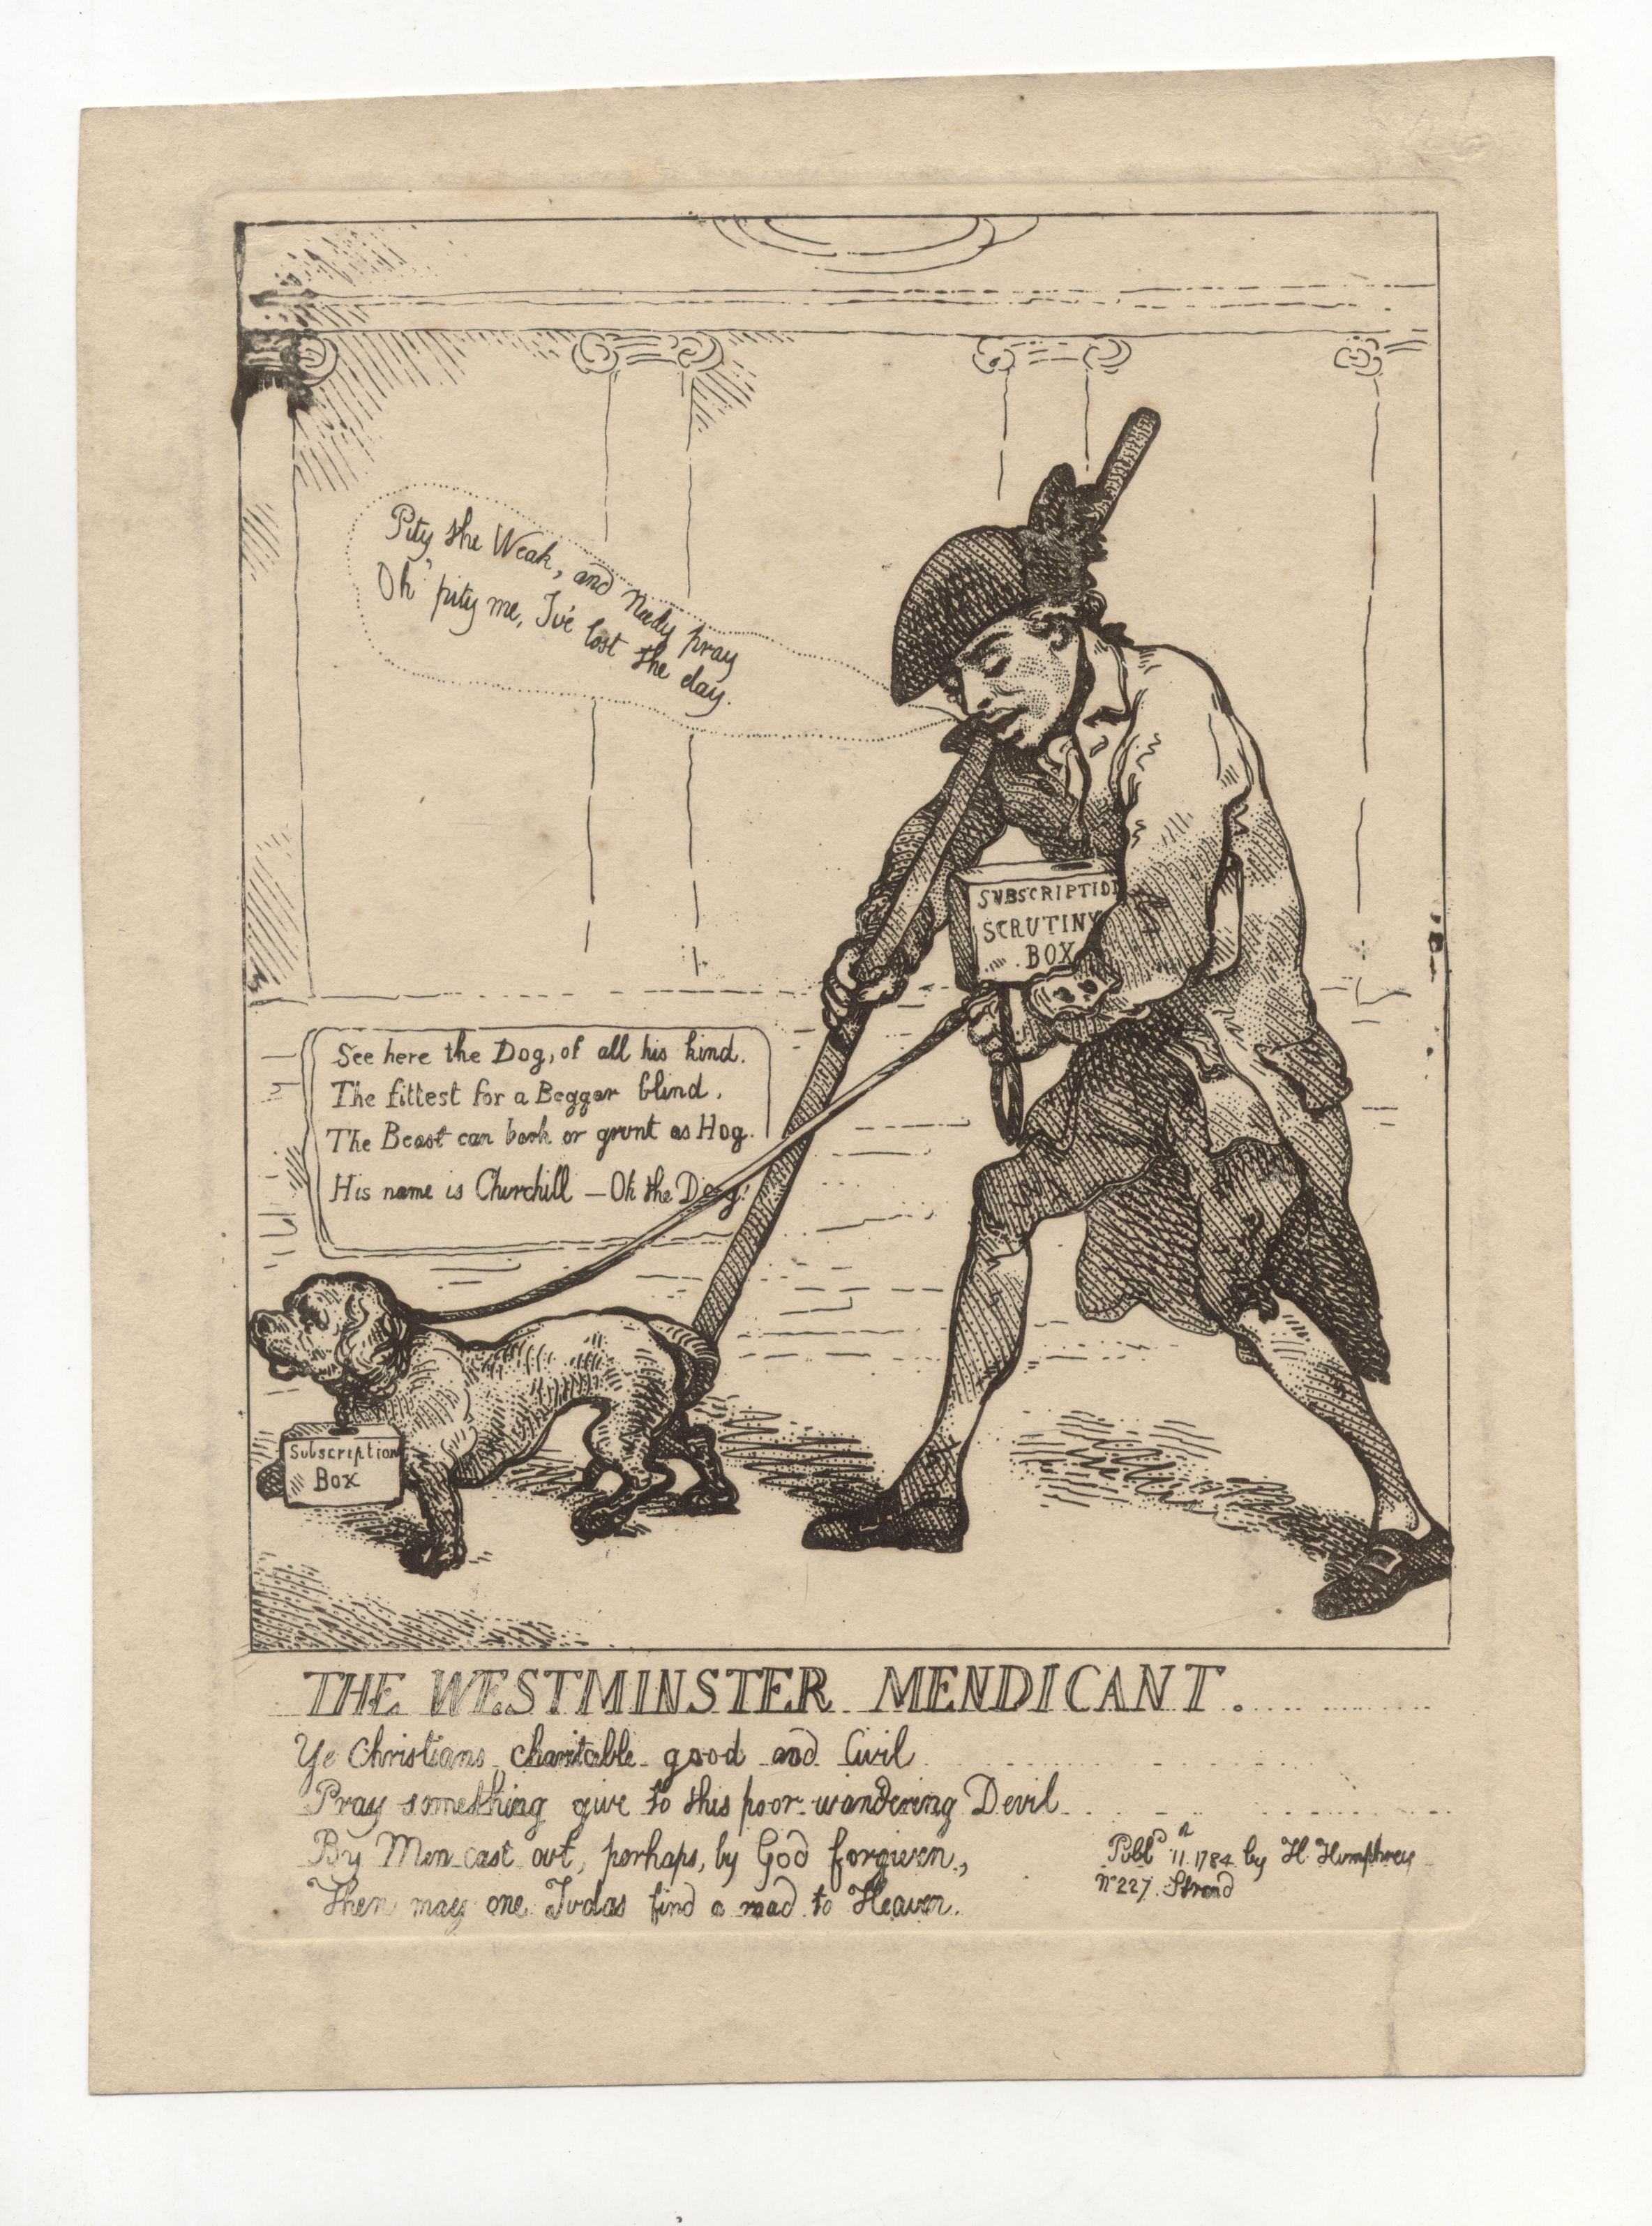 A blind beggar, Sir Cecil Wray, being led by his dog. This satire is a reference to Wray's lack of success in contesting the Westminster constituency at the 1784 general election.